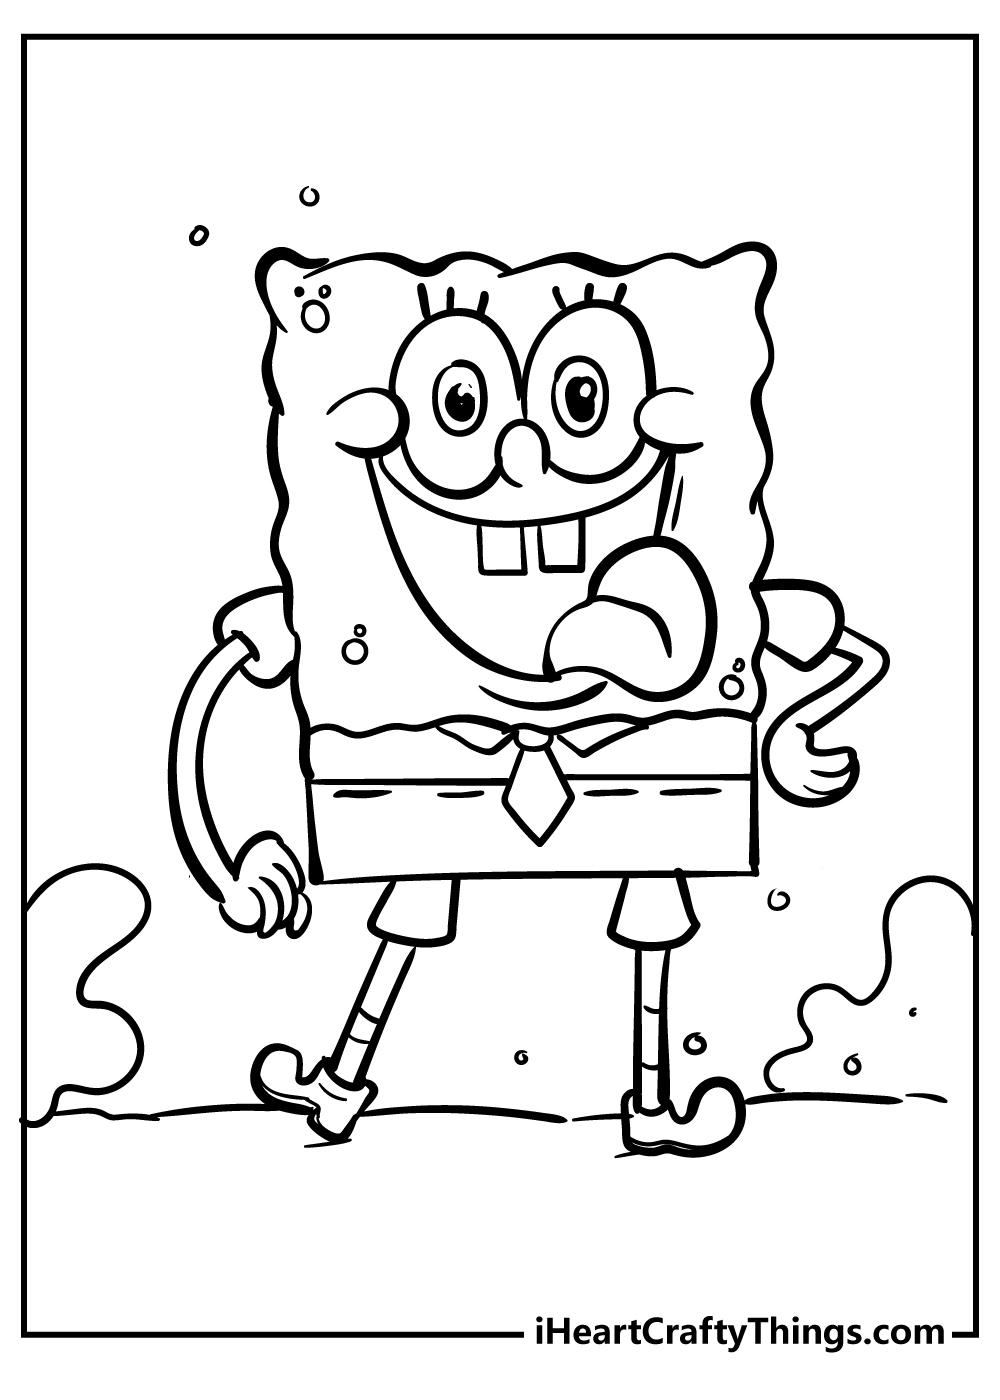 Cute Spongebob Coloring Pages Updated 20